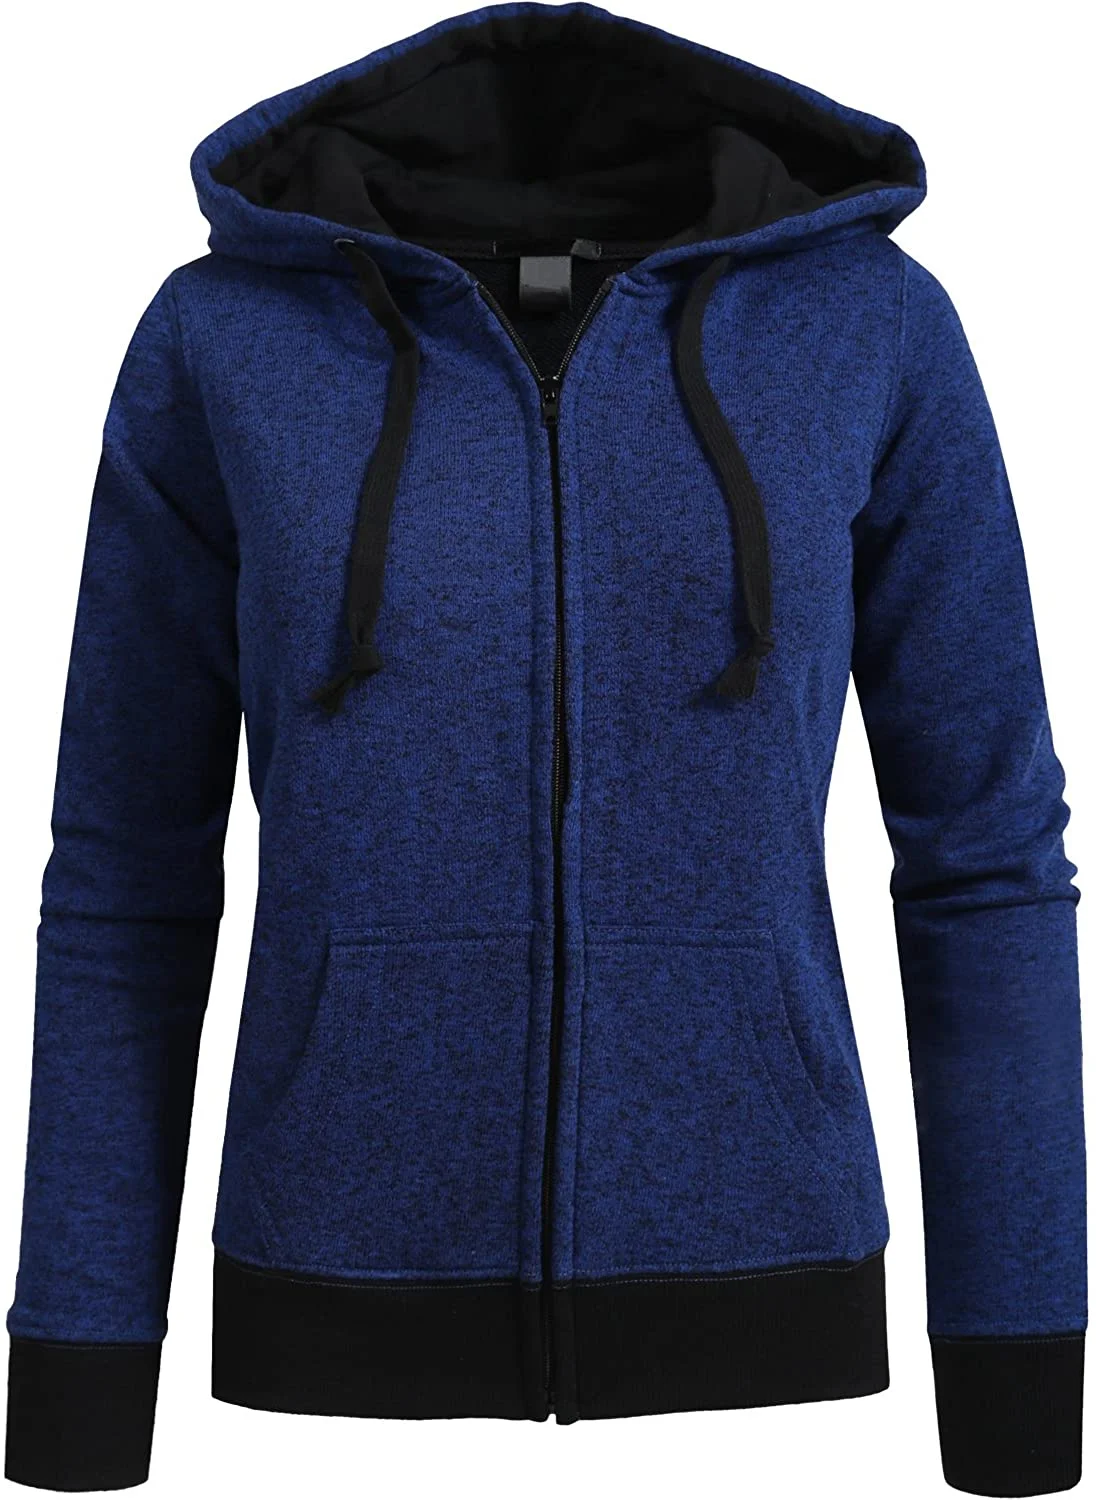 Customized Hoodies - Bangladesh Factory, Suppliers, Manufacturers